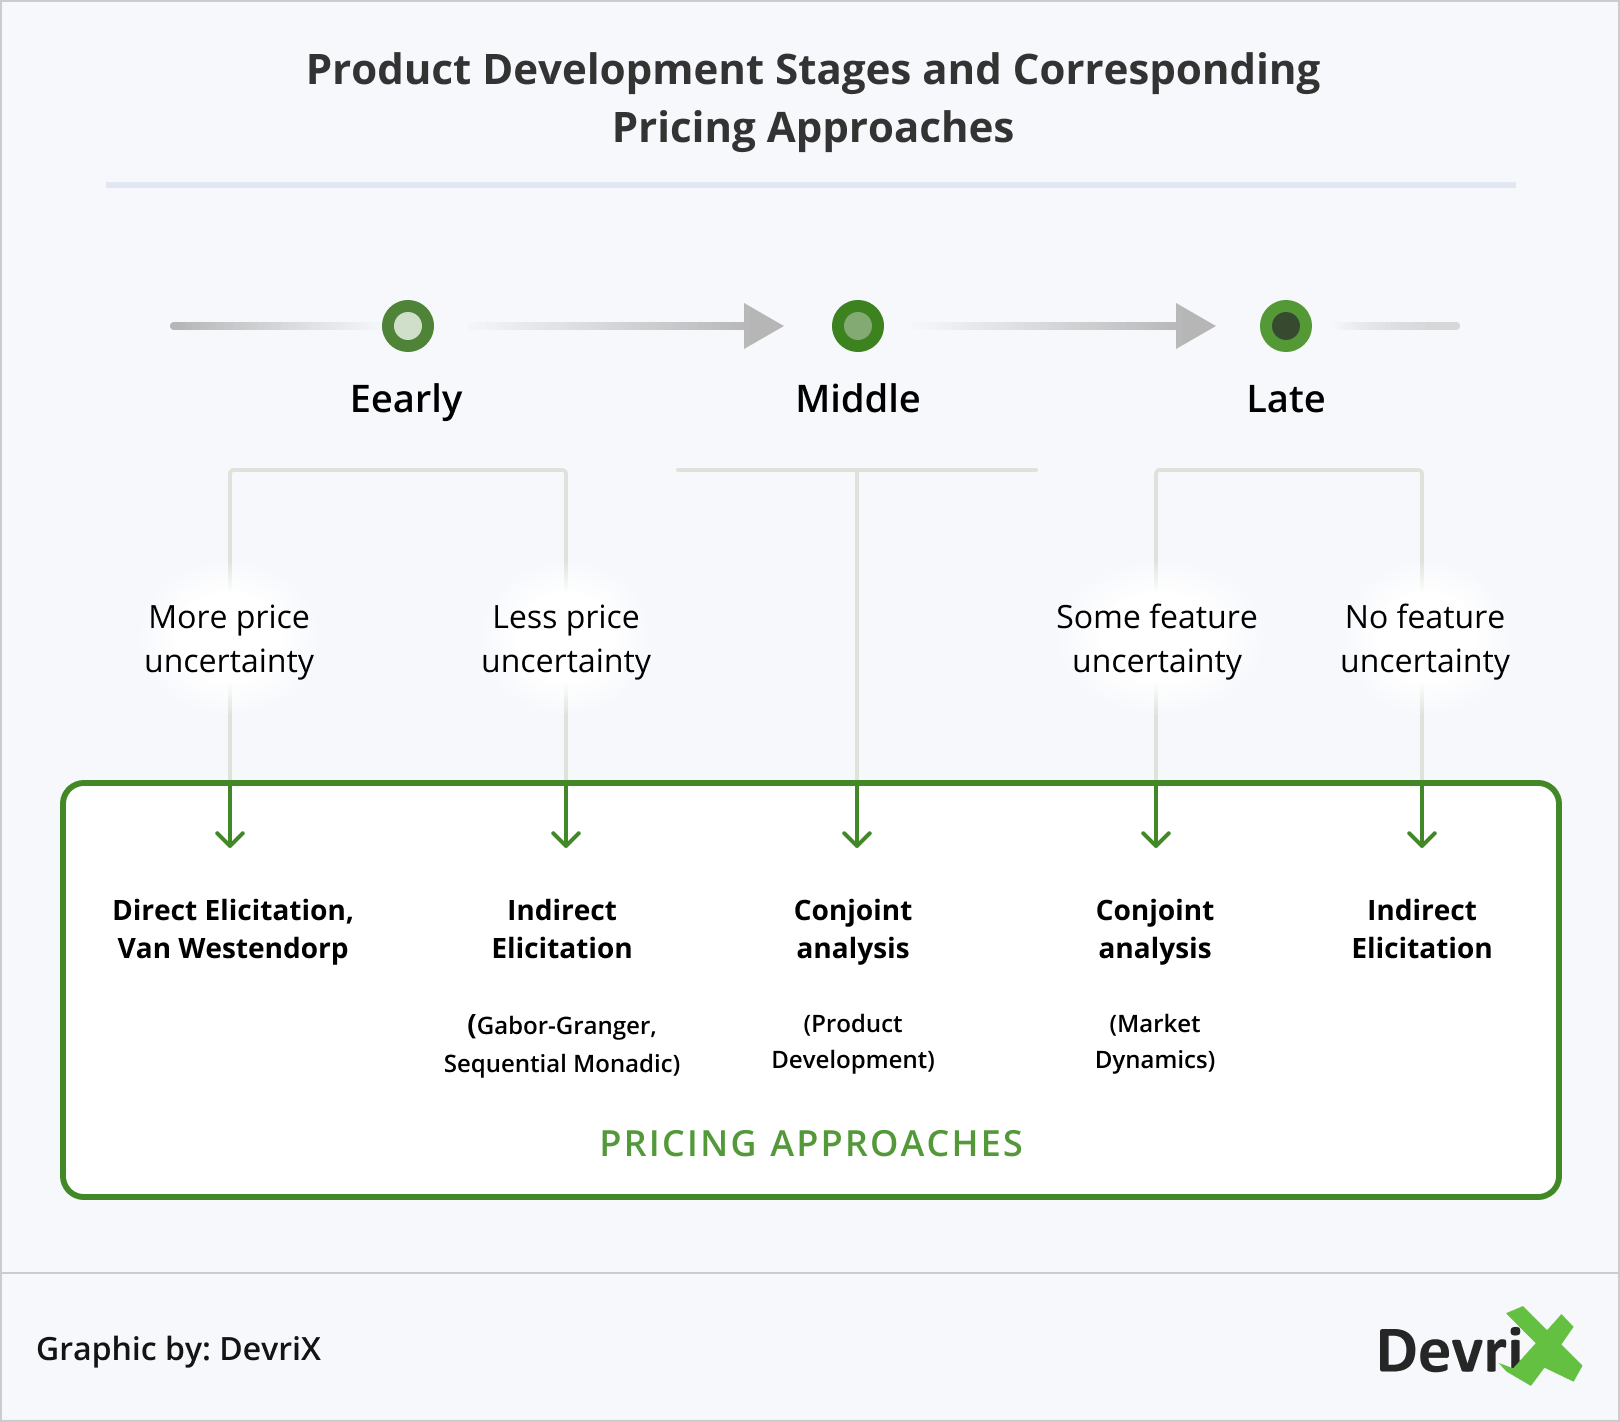 Product Development Stages and Corresponding Pricing Approaches